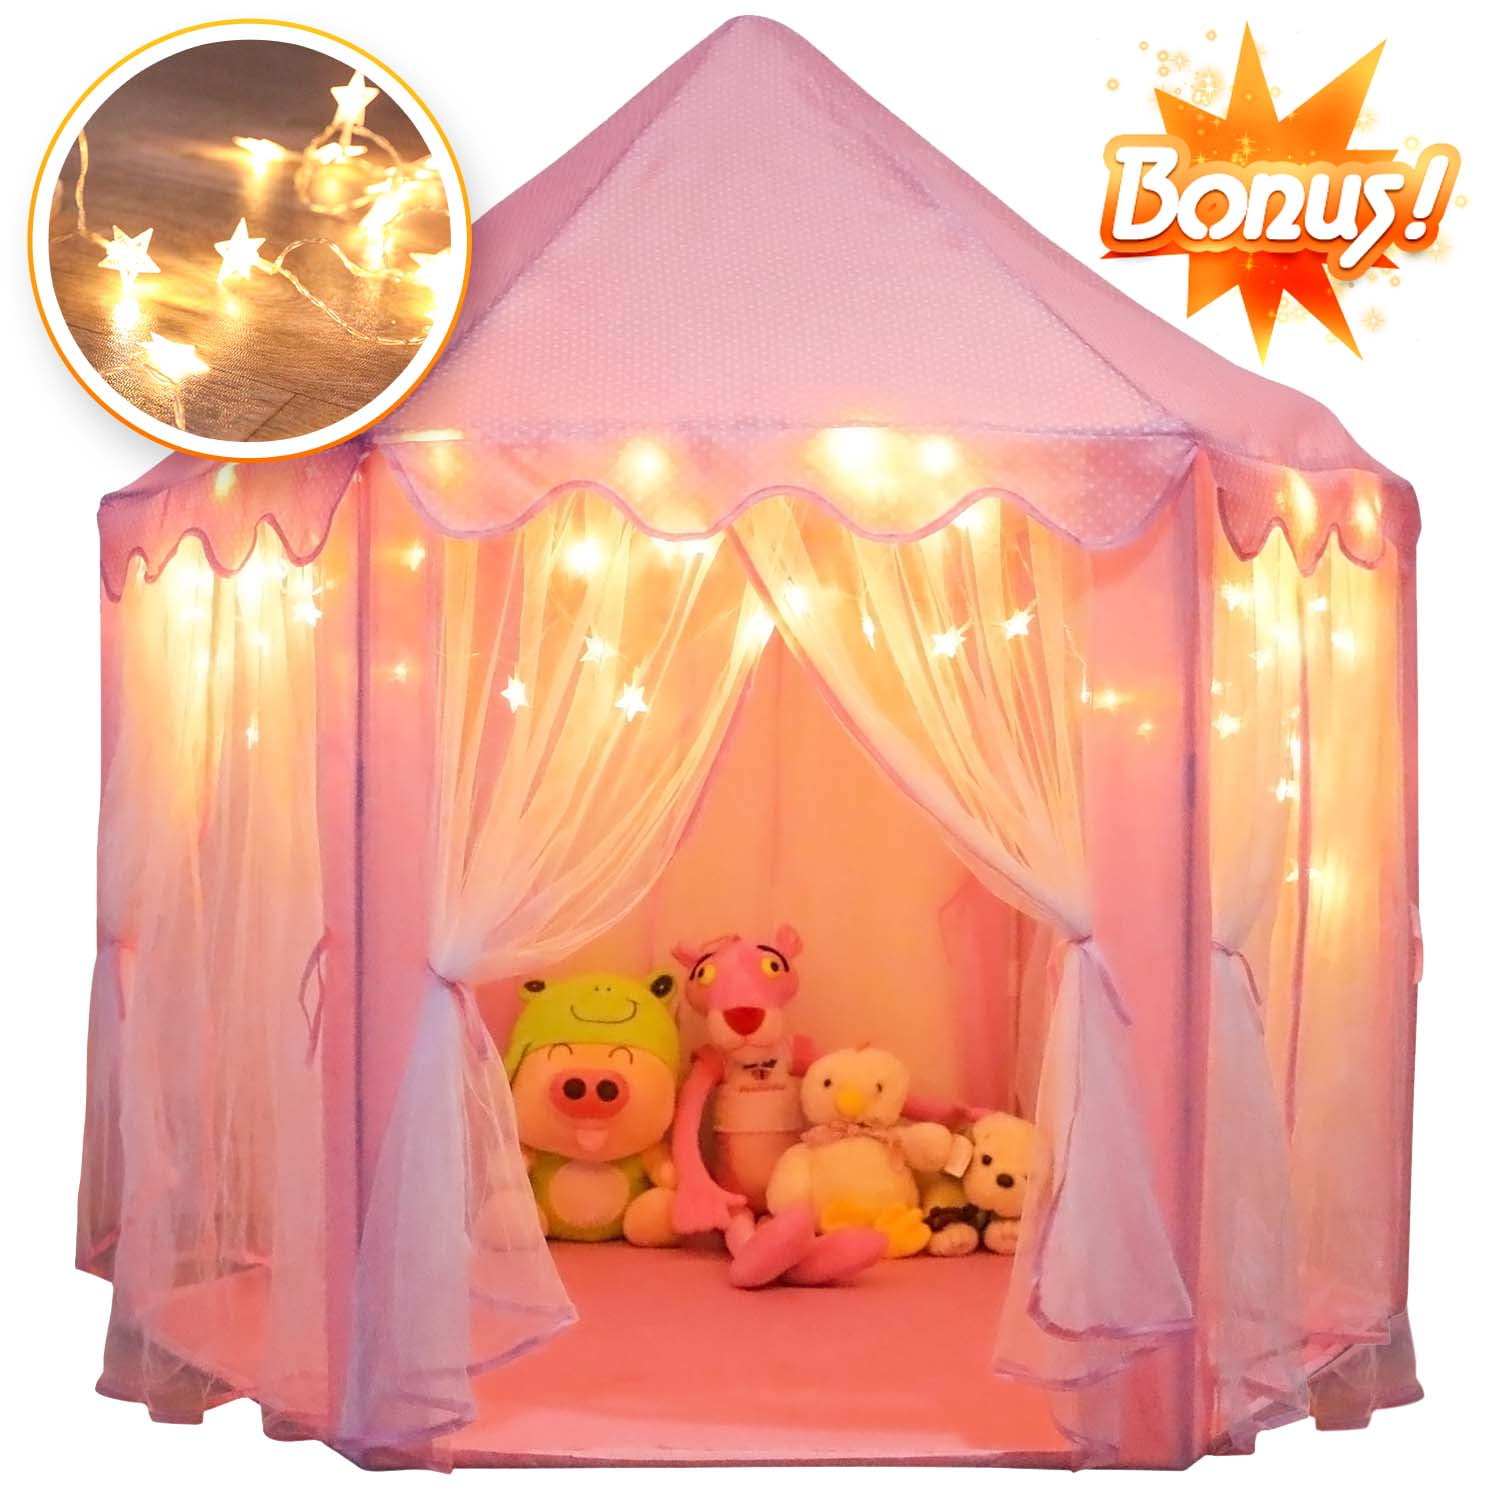 Princess Girls Kids Castle Play Tent Outdoor Indoor Baby House Game Playhouse US 